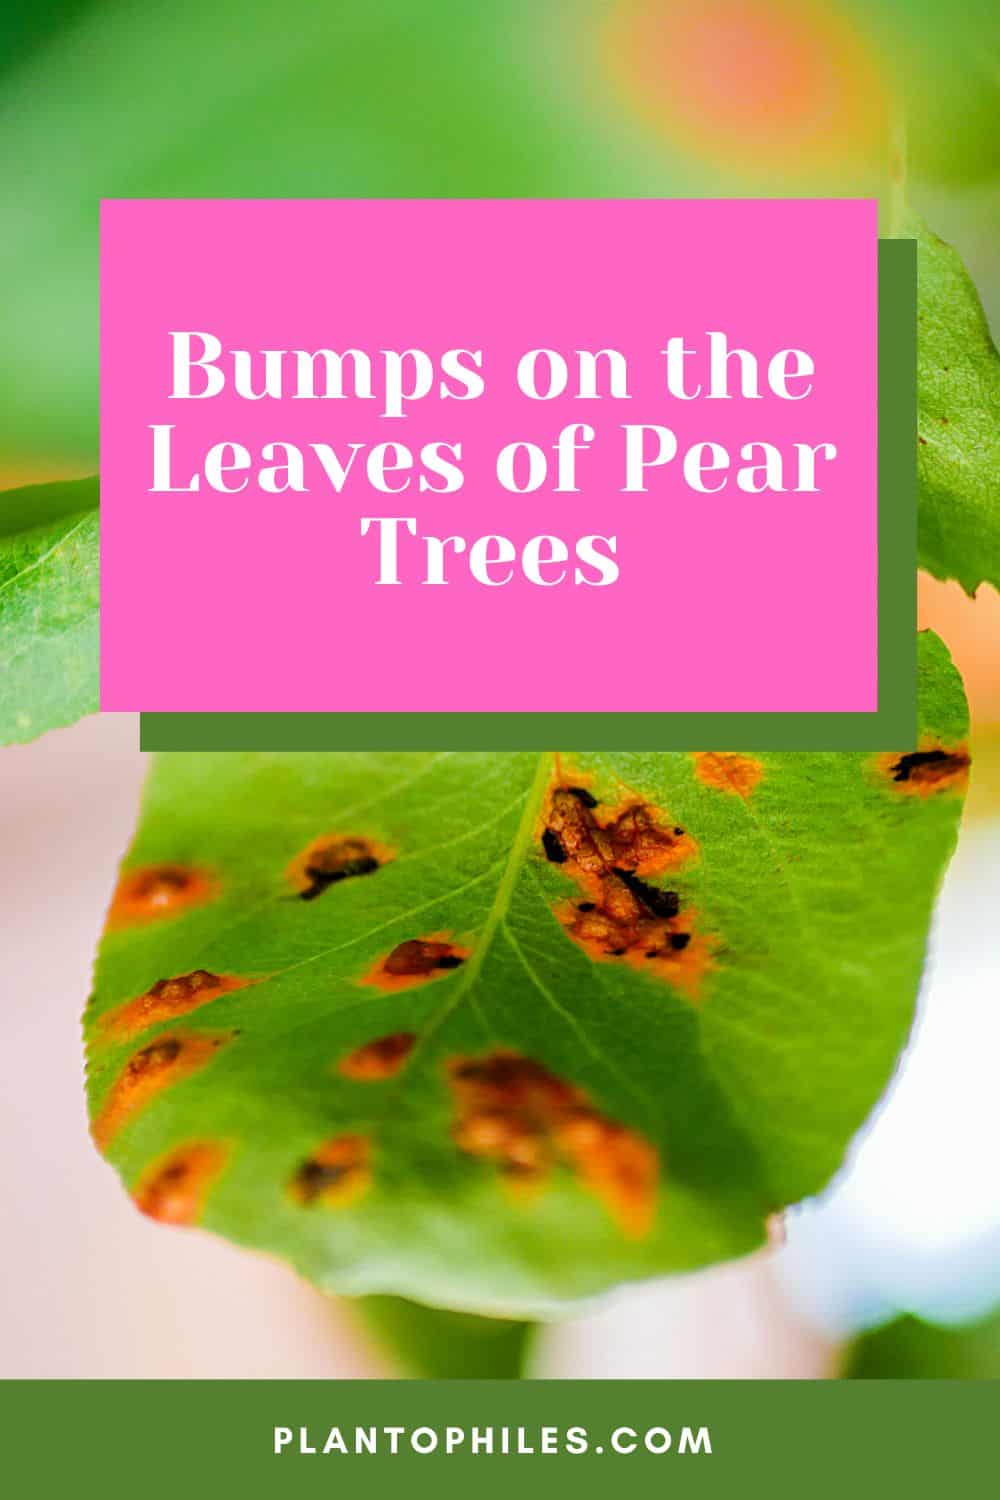 Bumps on the Leaves of Pear Trees